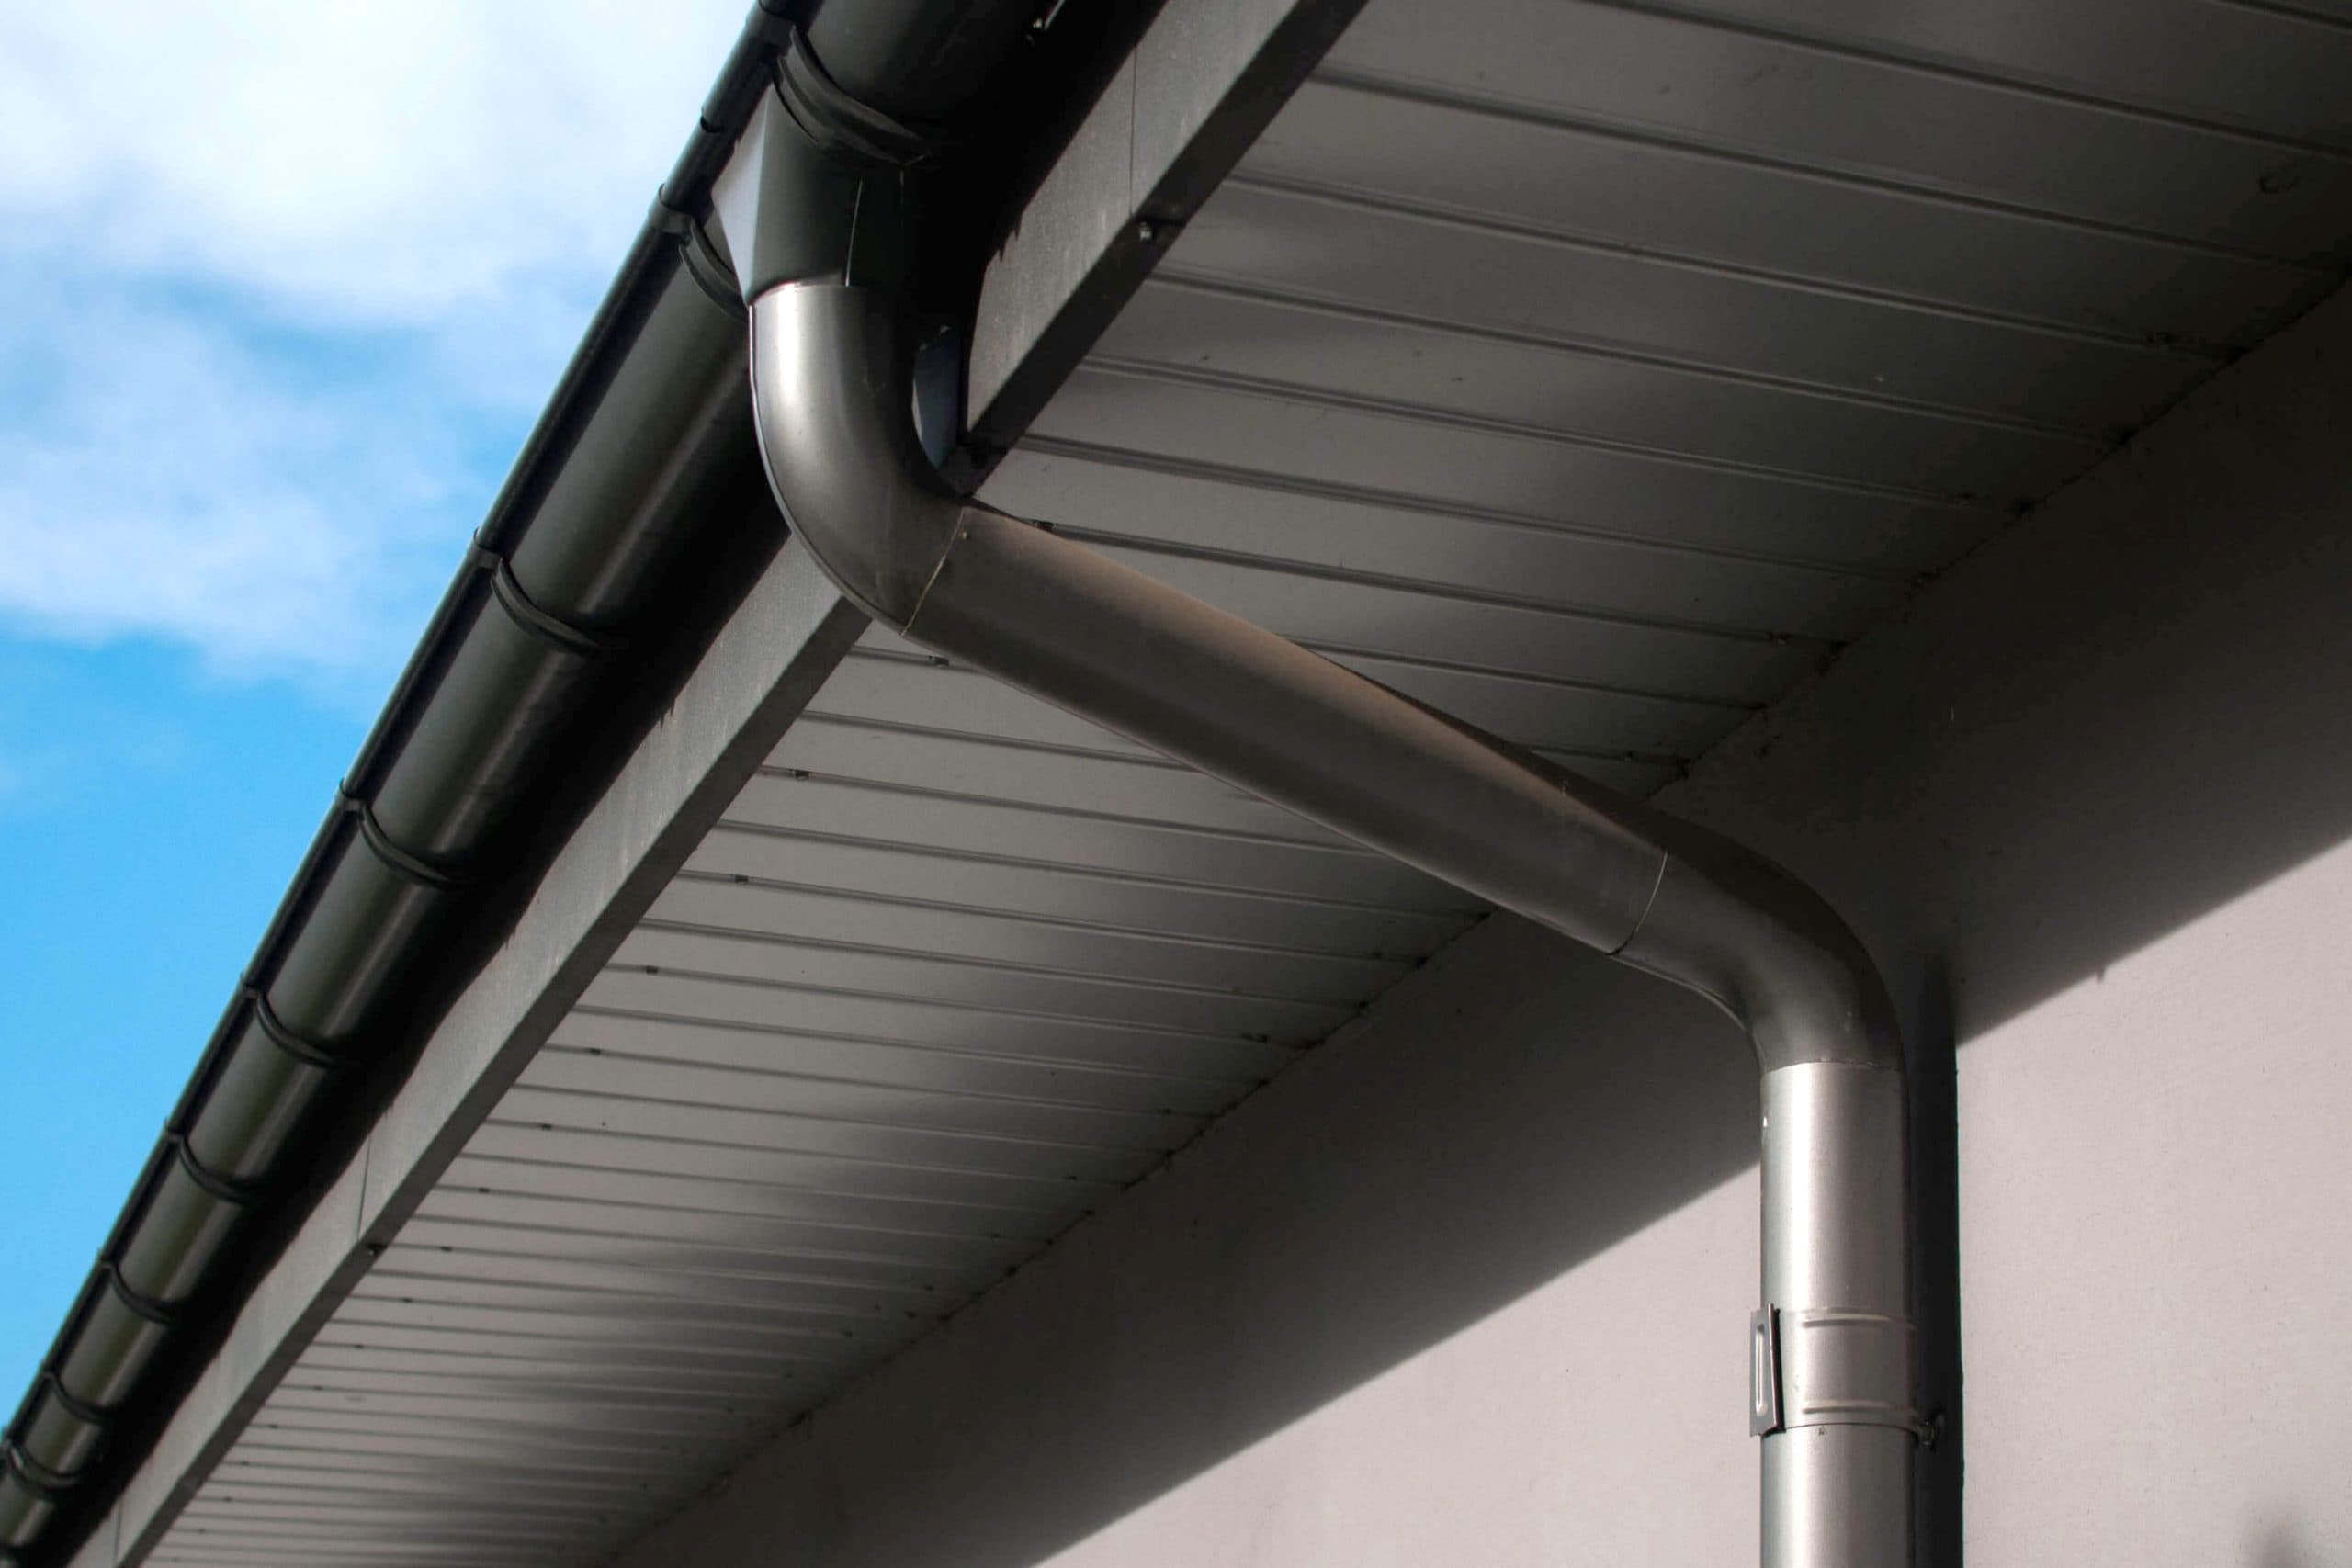 Reliable and affordable Galvanized gutters installation in Bradenton